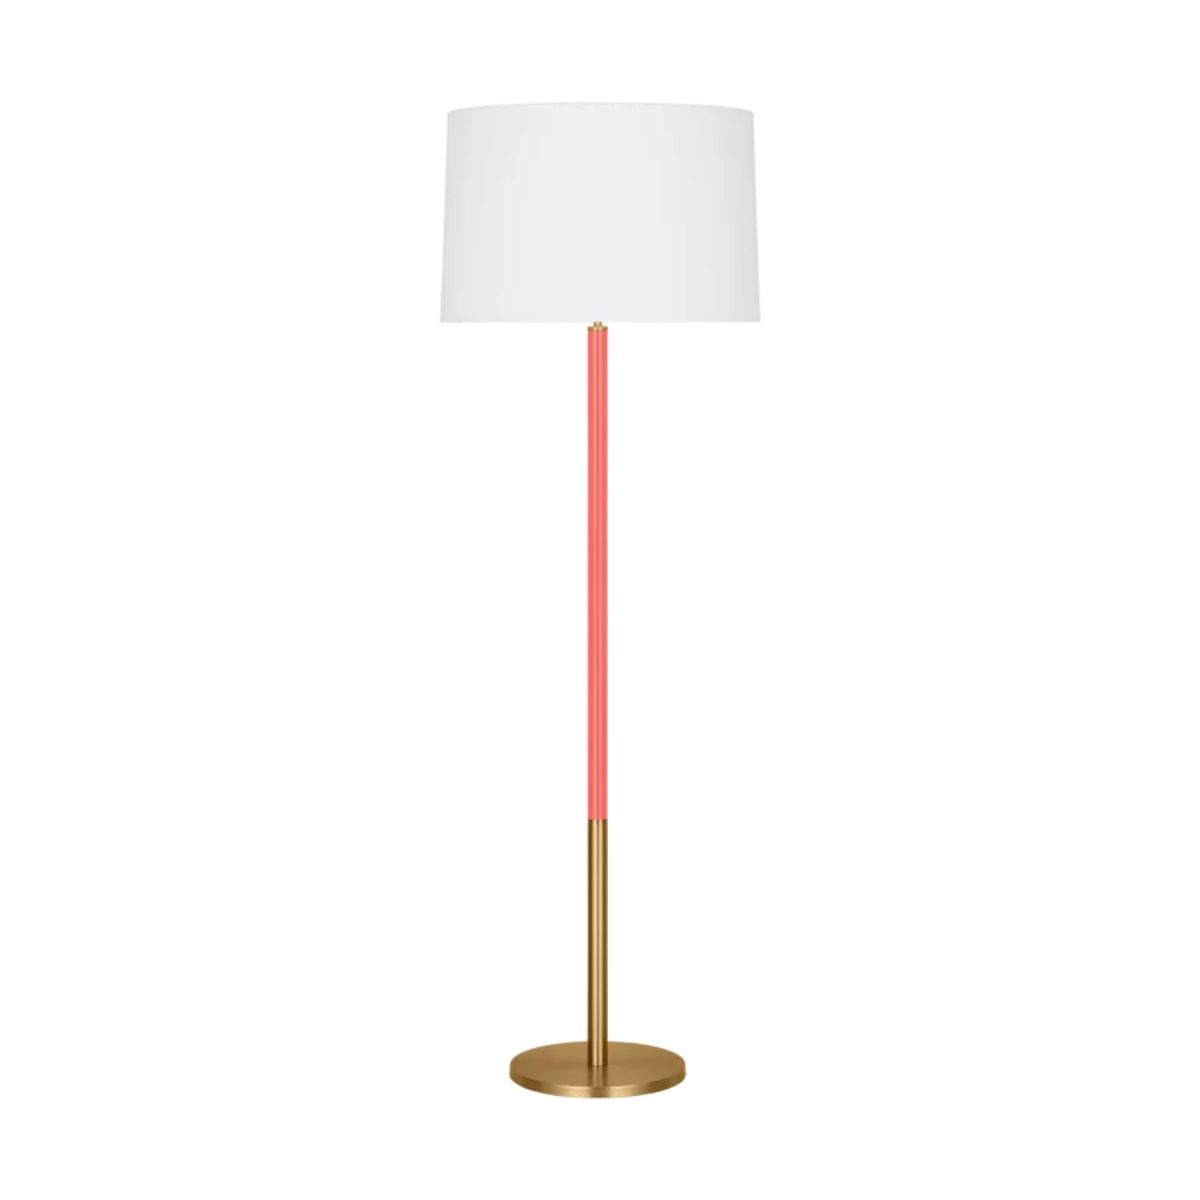 Monroe Large Floor Lamp Burnished Brass with Coral Accents